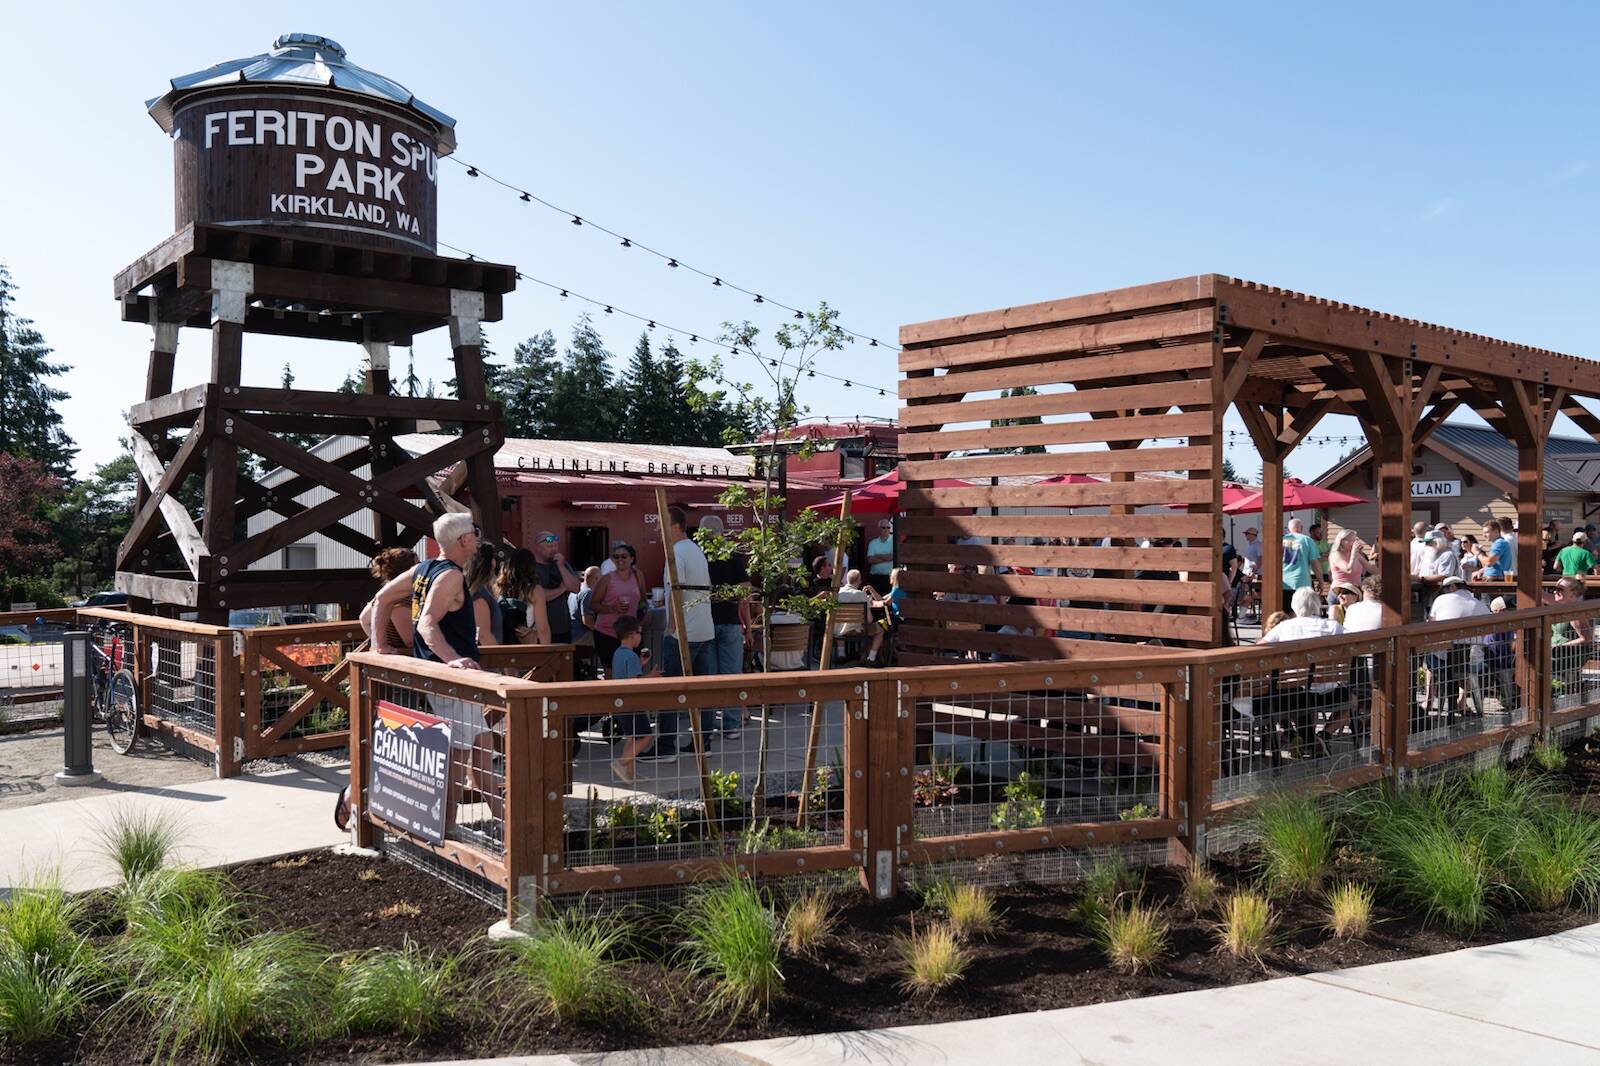 Chainline Brewing’s outpost at Feriton Spur Park (Photo credit: Mike Nakamura Photography LLC)